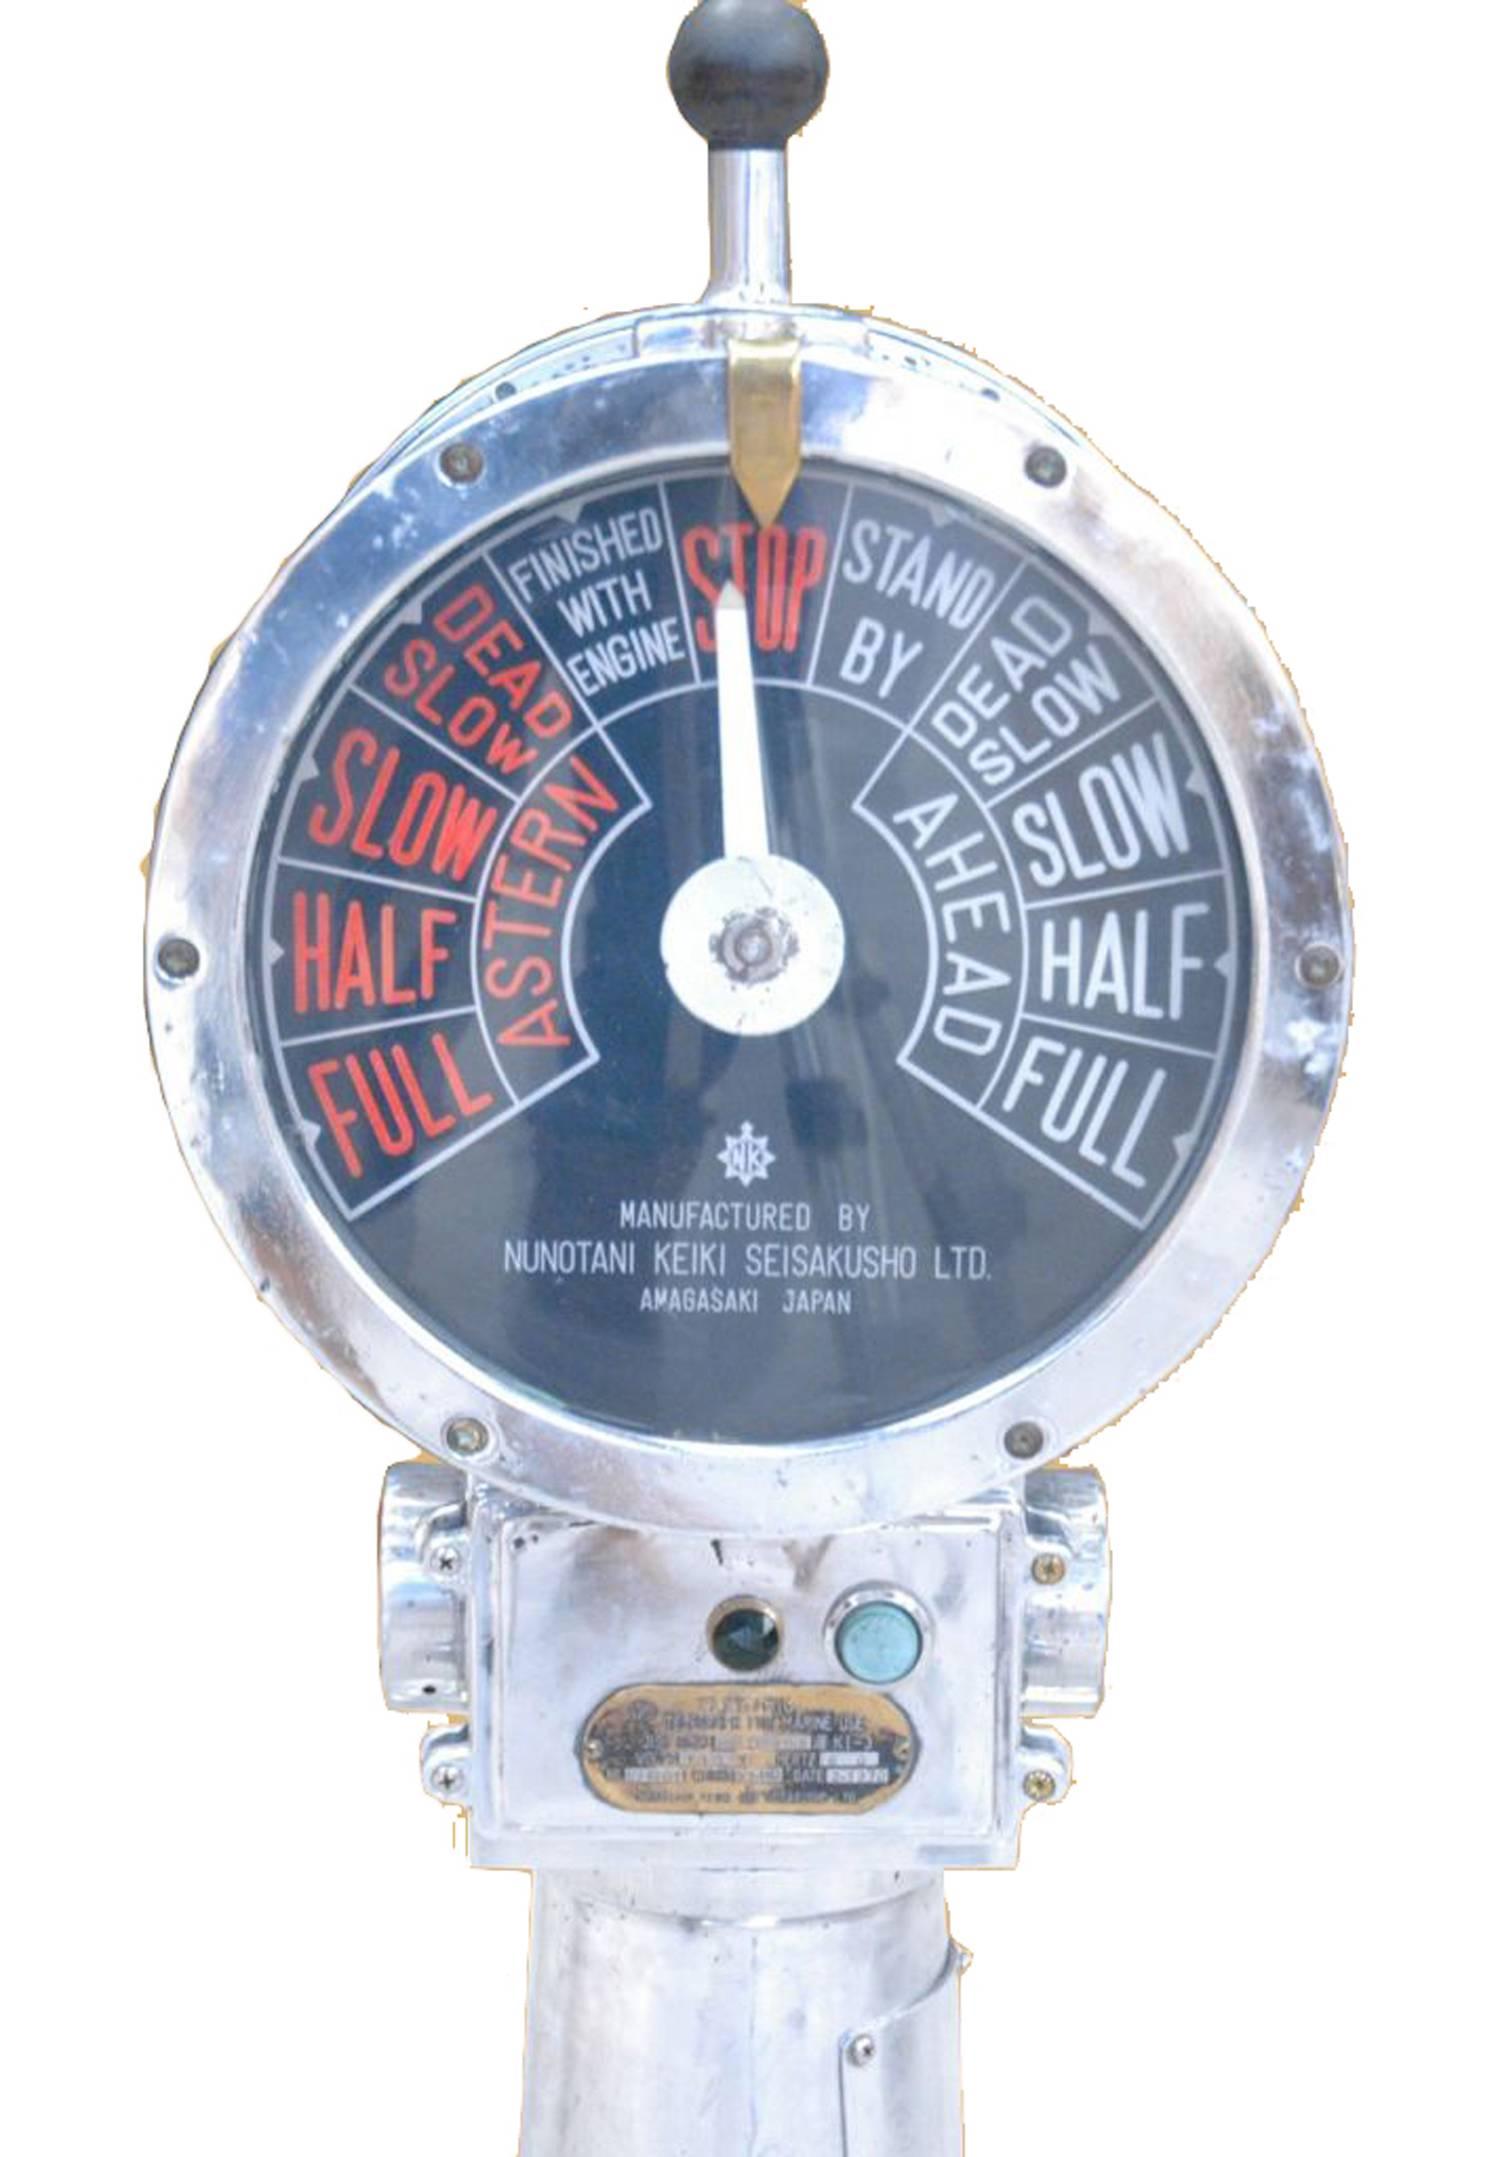 Double-sided aluminium cargo ship telegraph manufactured by Nunotani Keiki Seisakusho Limited. Completely polished.

H 101 + handle 110 / dial D 36 / W 31 cm 29 KG 